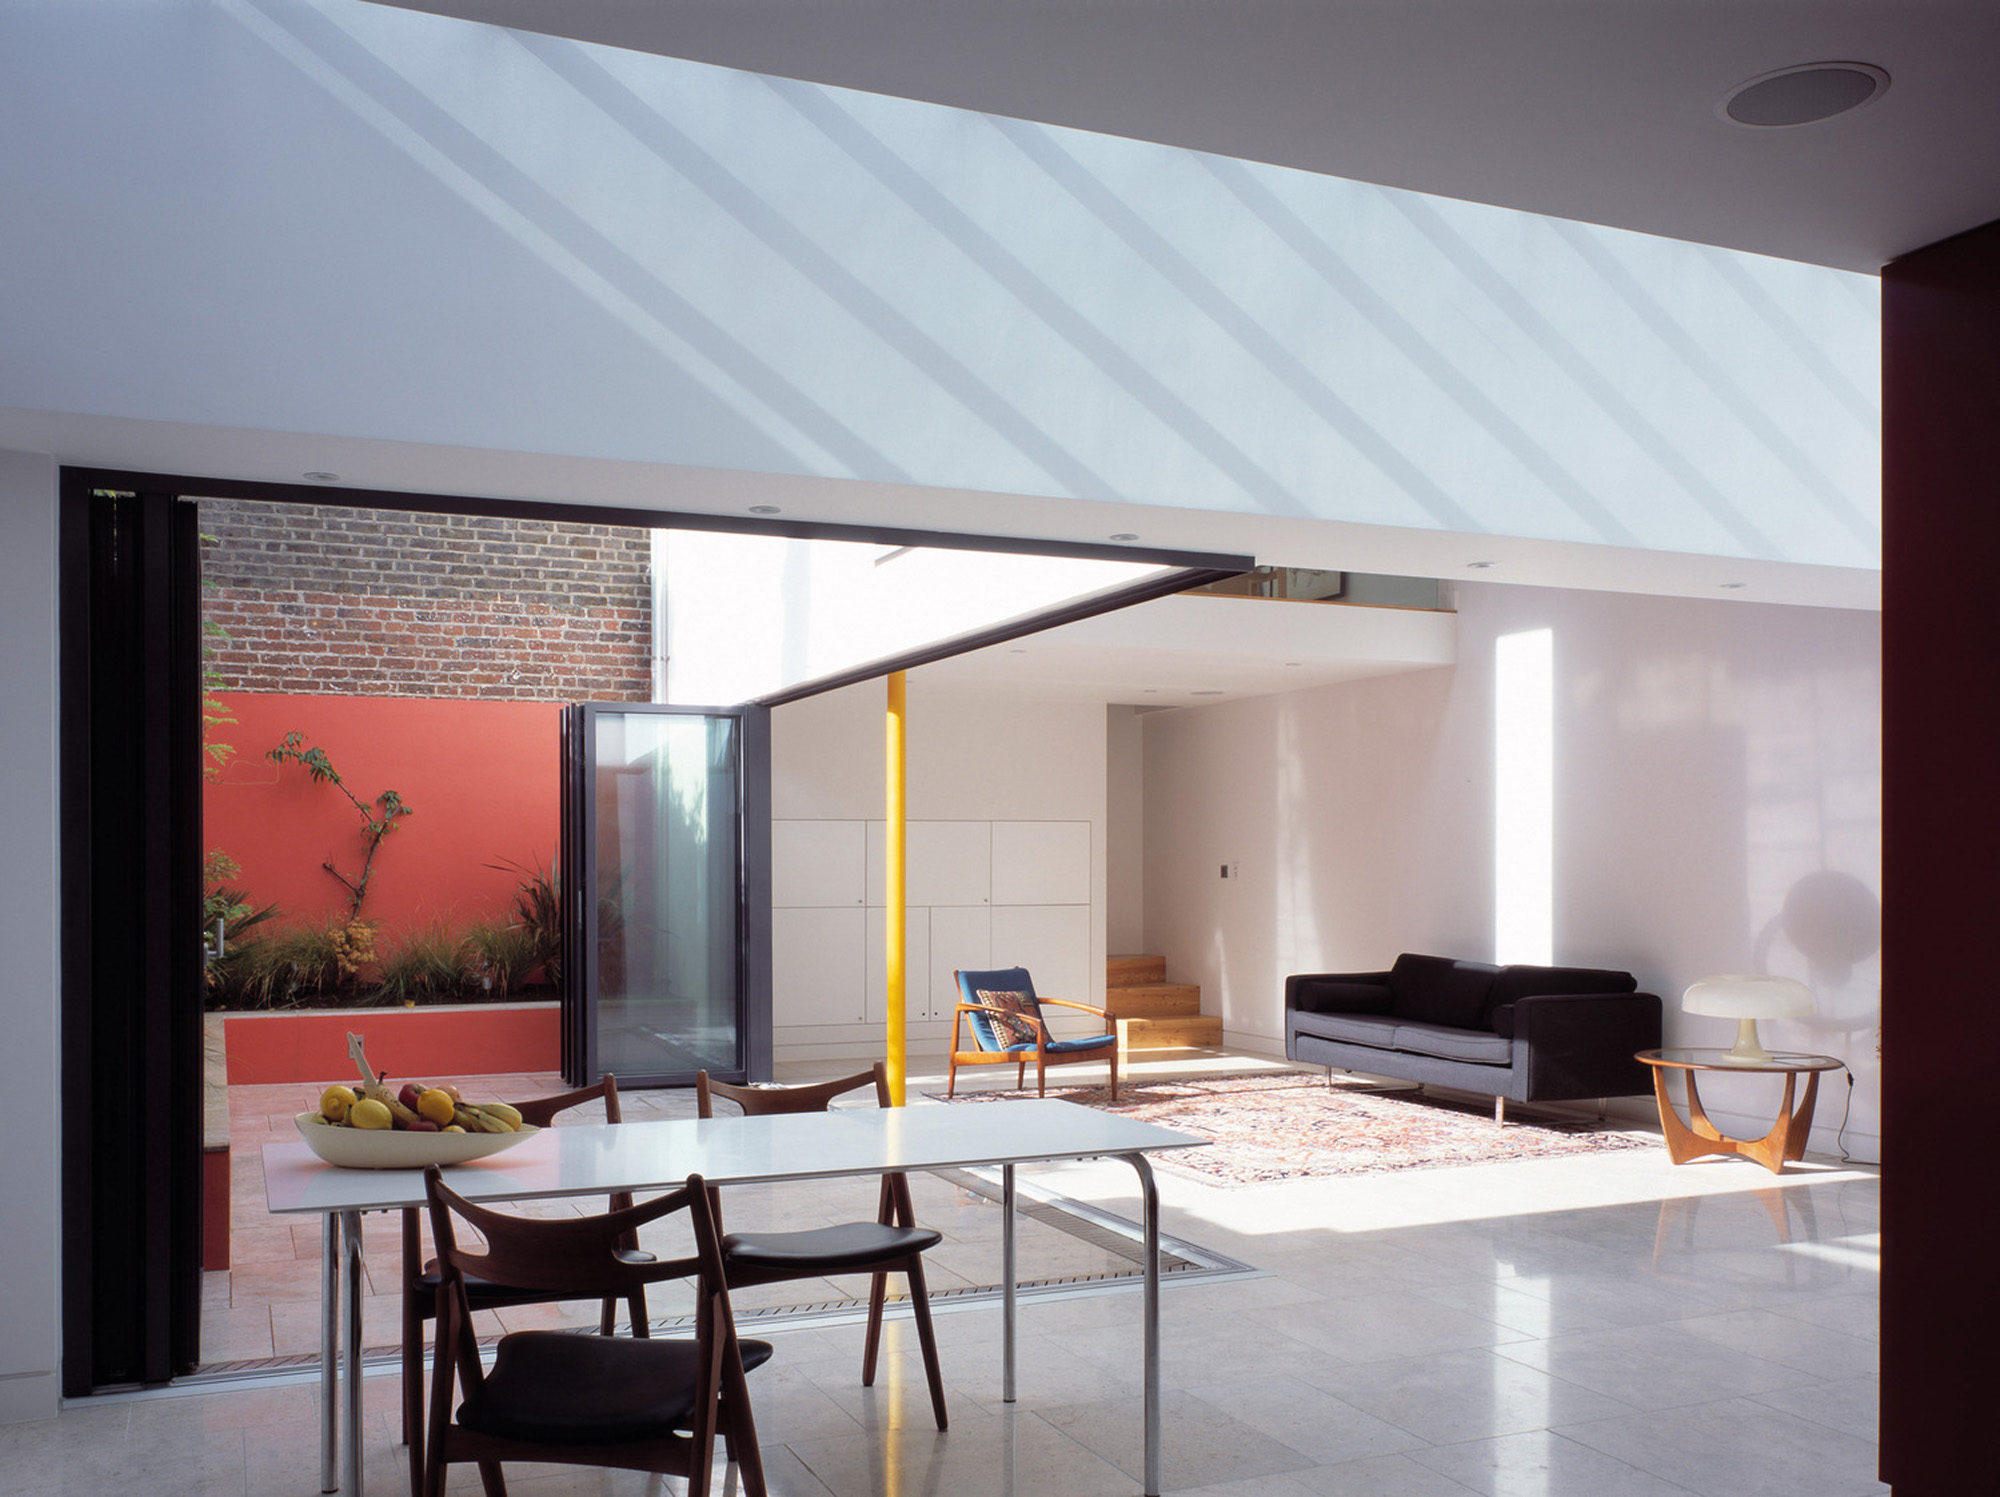 Living room by Pitman Tozer Architects - contemporary design studio in London